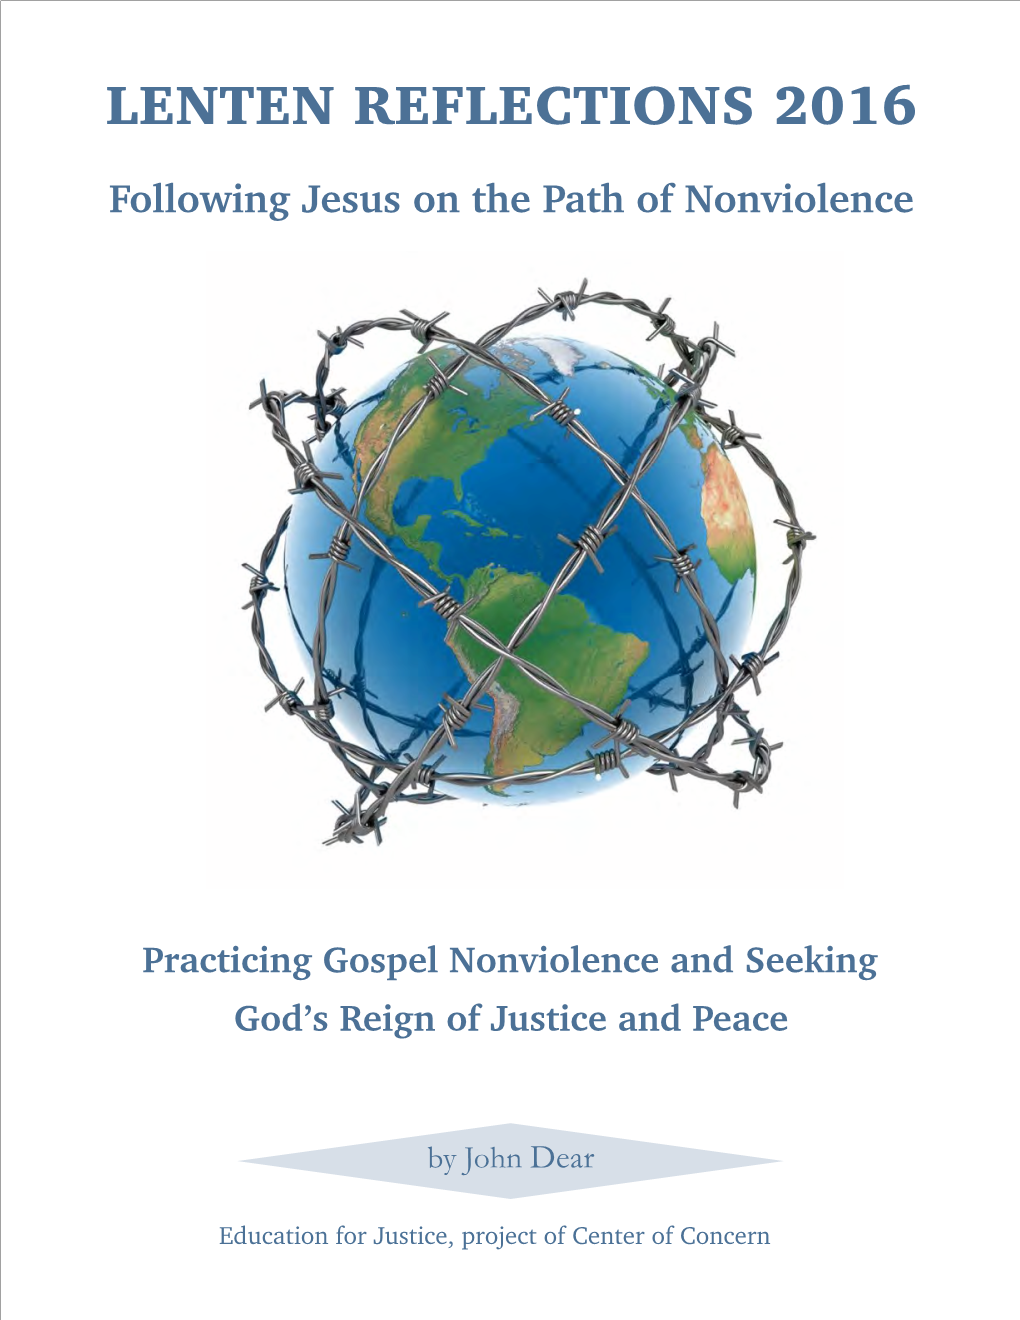 Following Jesus on the Path of Nonviolence